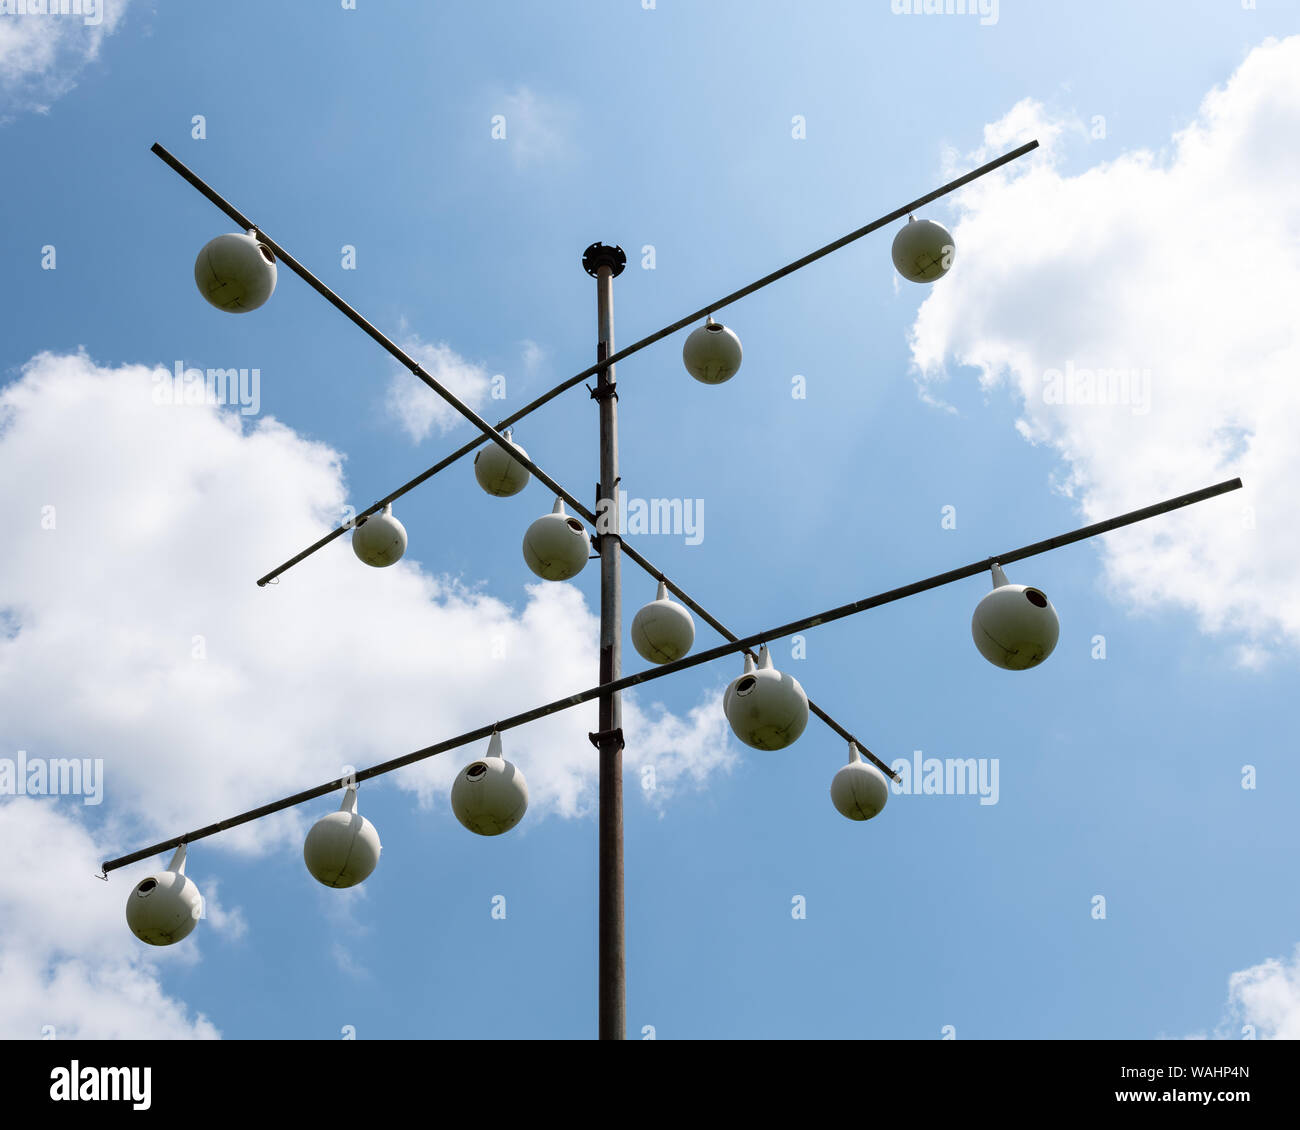 A purple martin gourd rack in front of a blue sky with white clouds. Stock Photo